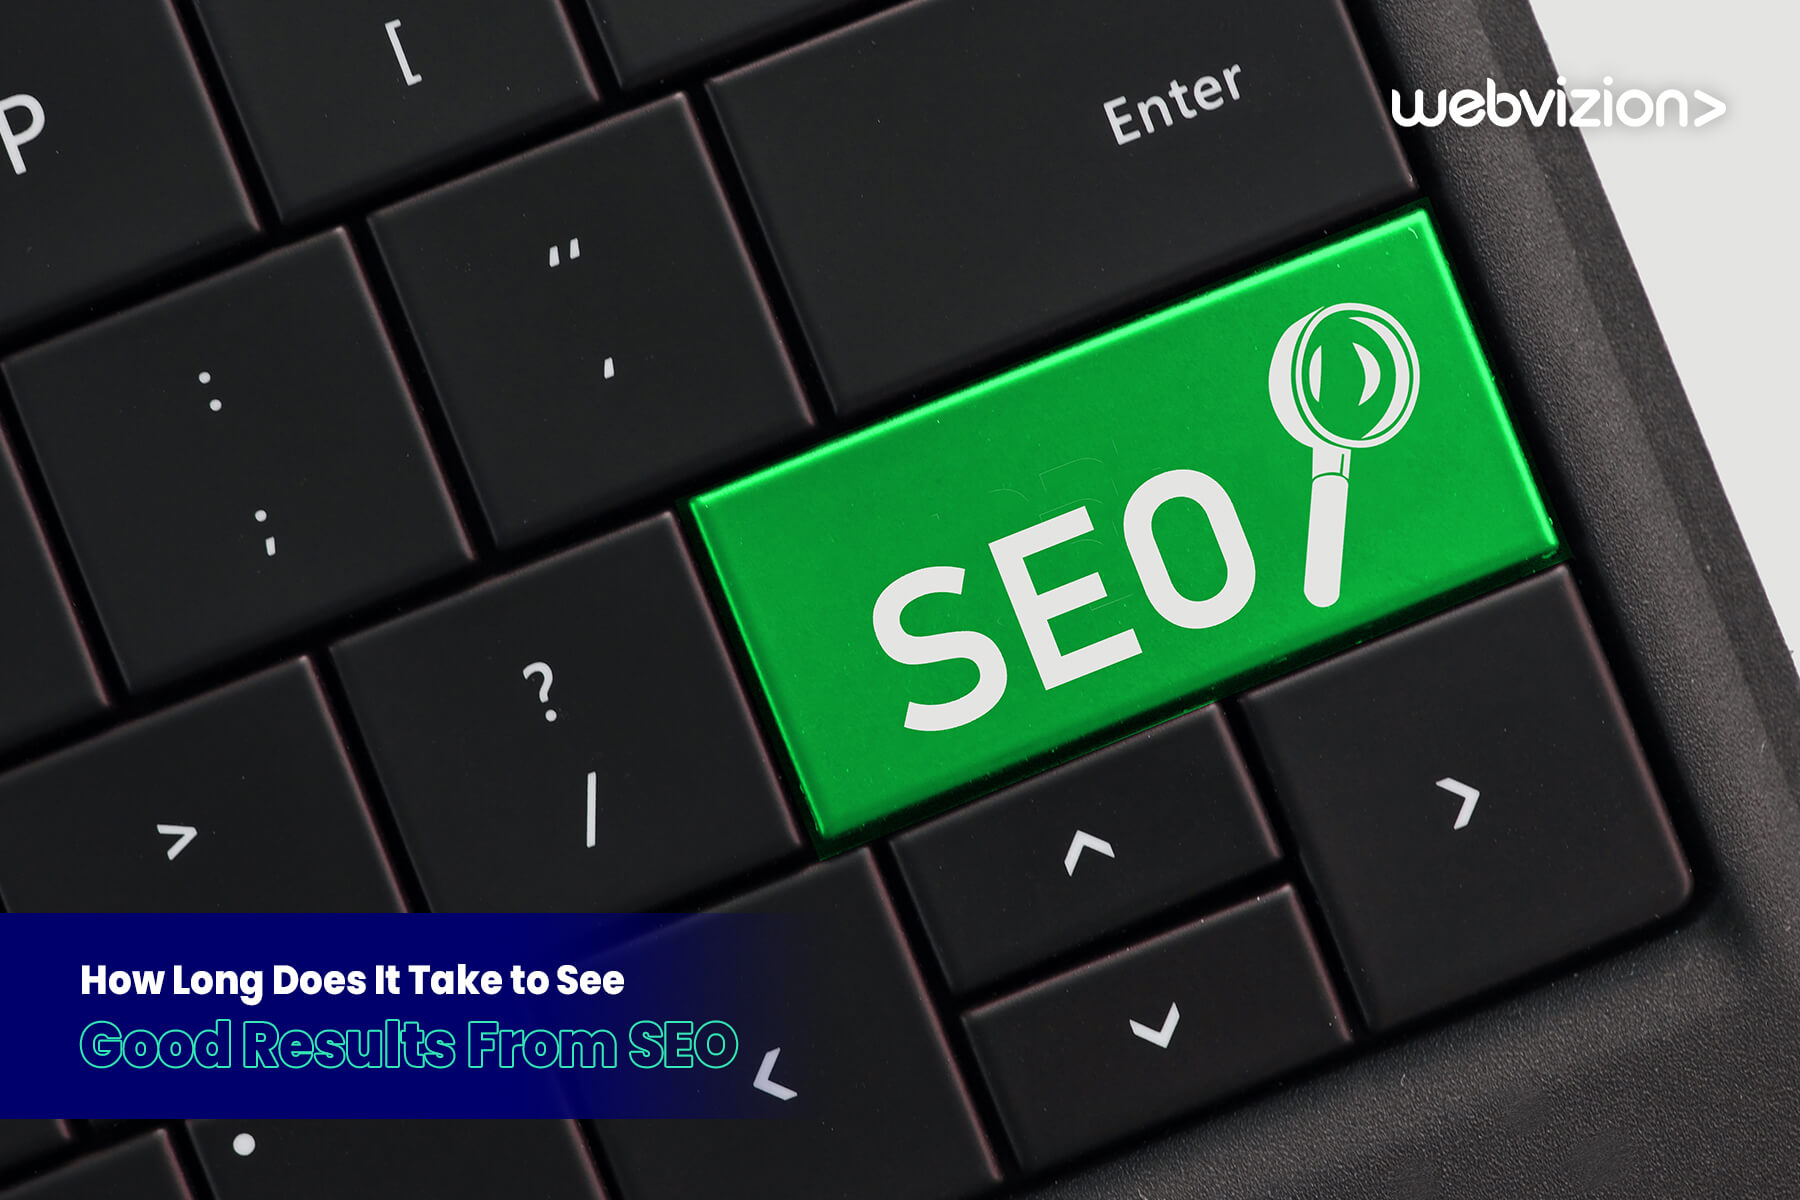 How Long Does It Take to See Good Results From SEO